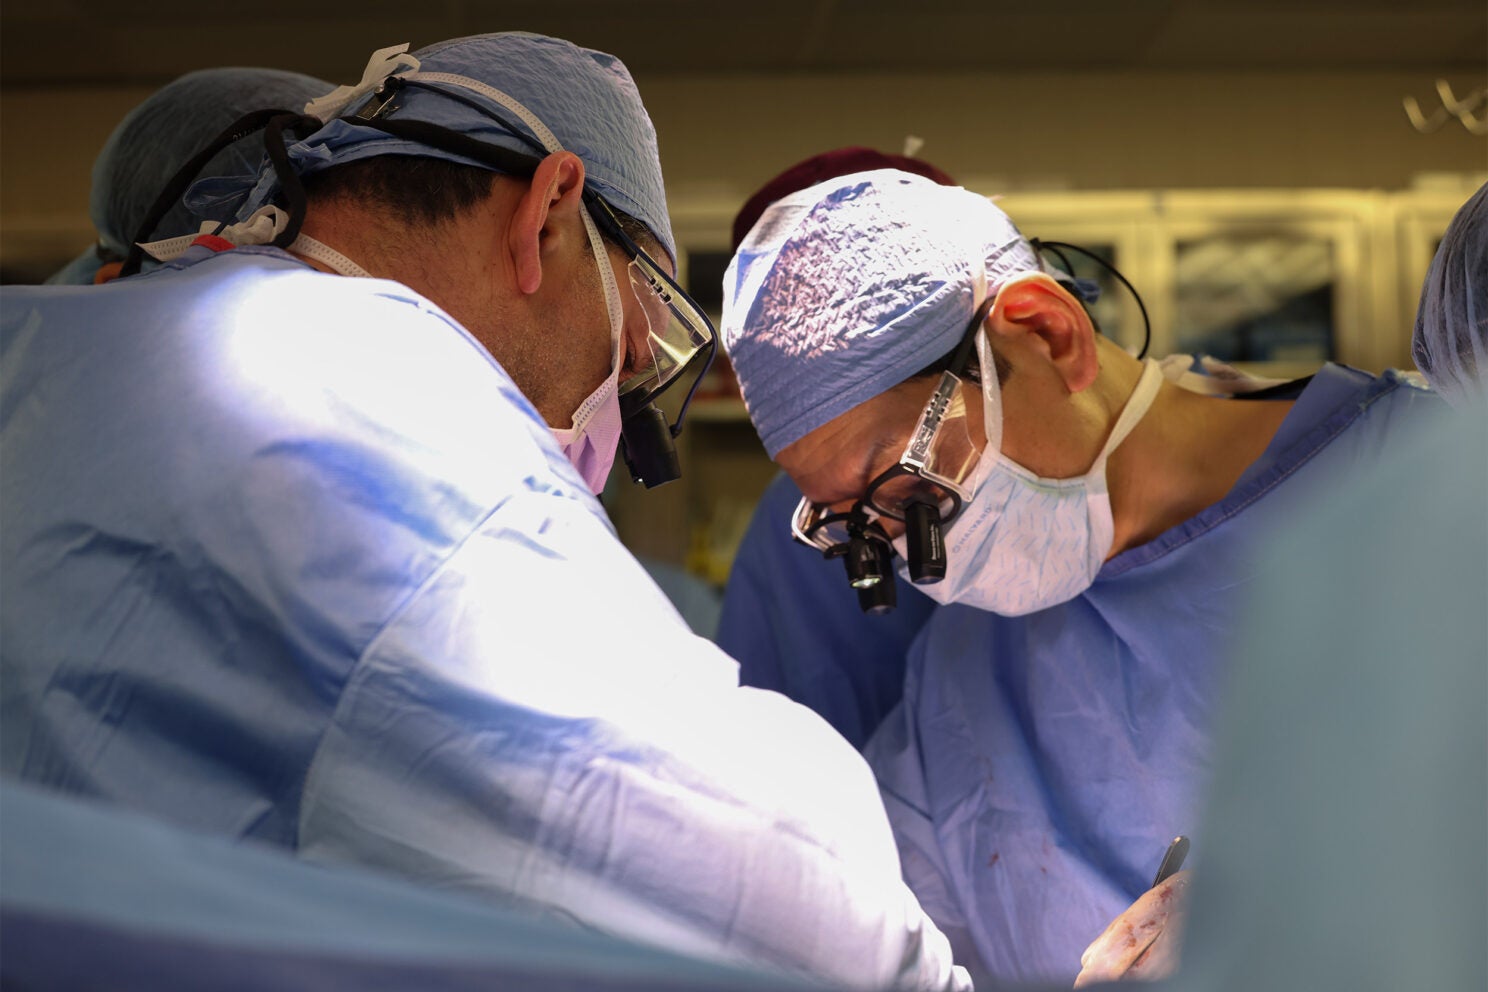 Massachusetts General Hospital transplant surgeons Dr. Nahel Elias, left, and Dr. Tatsuo Kawai perform the surgery of a transplanted genetically modified pig kidney into a living human.